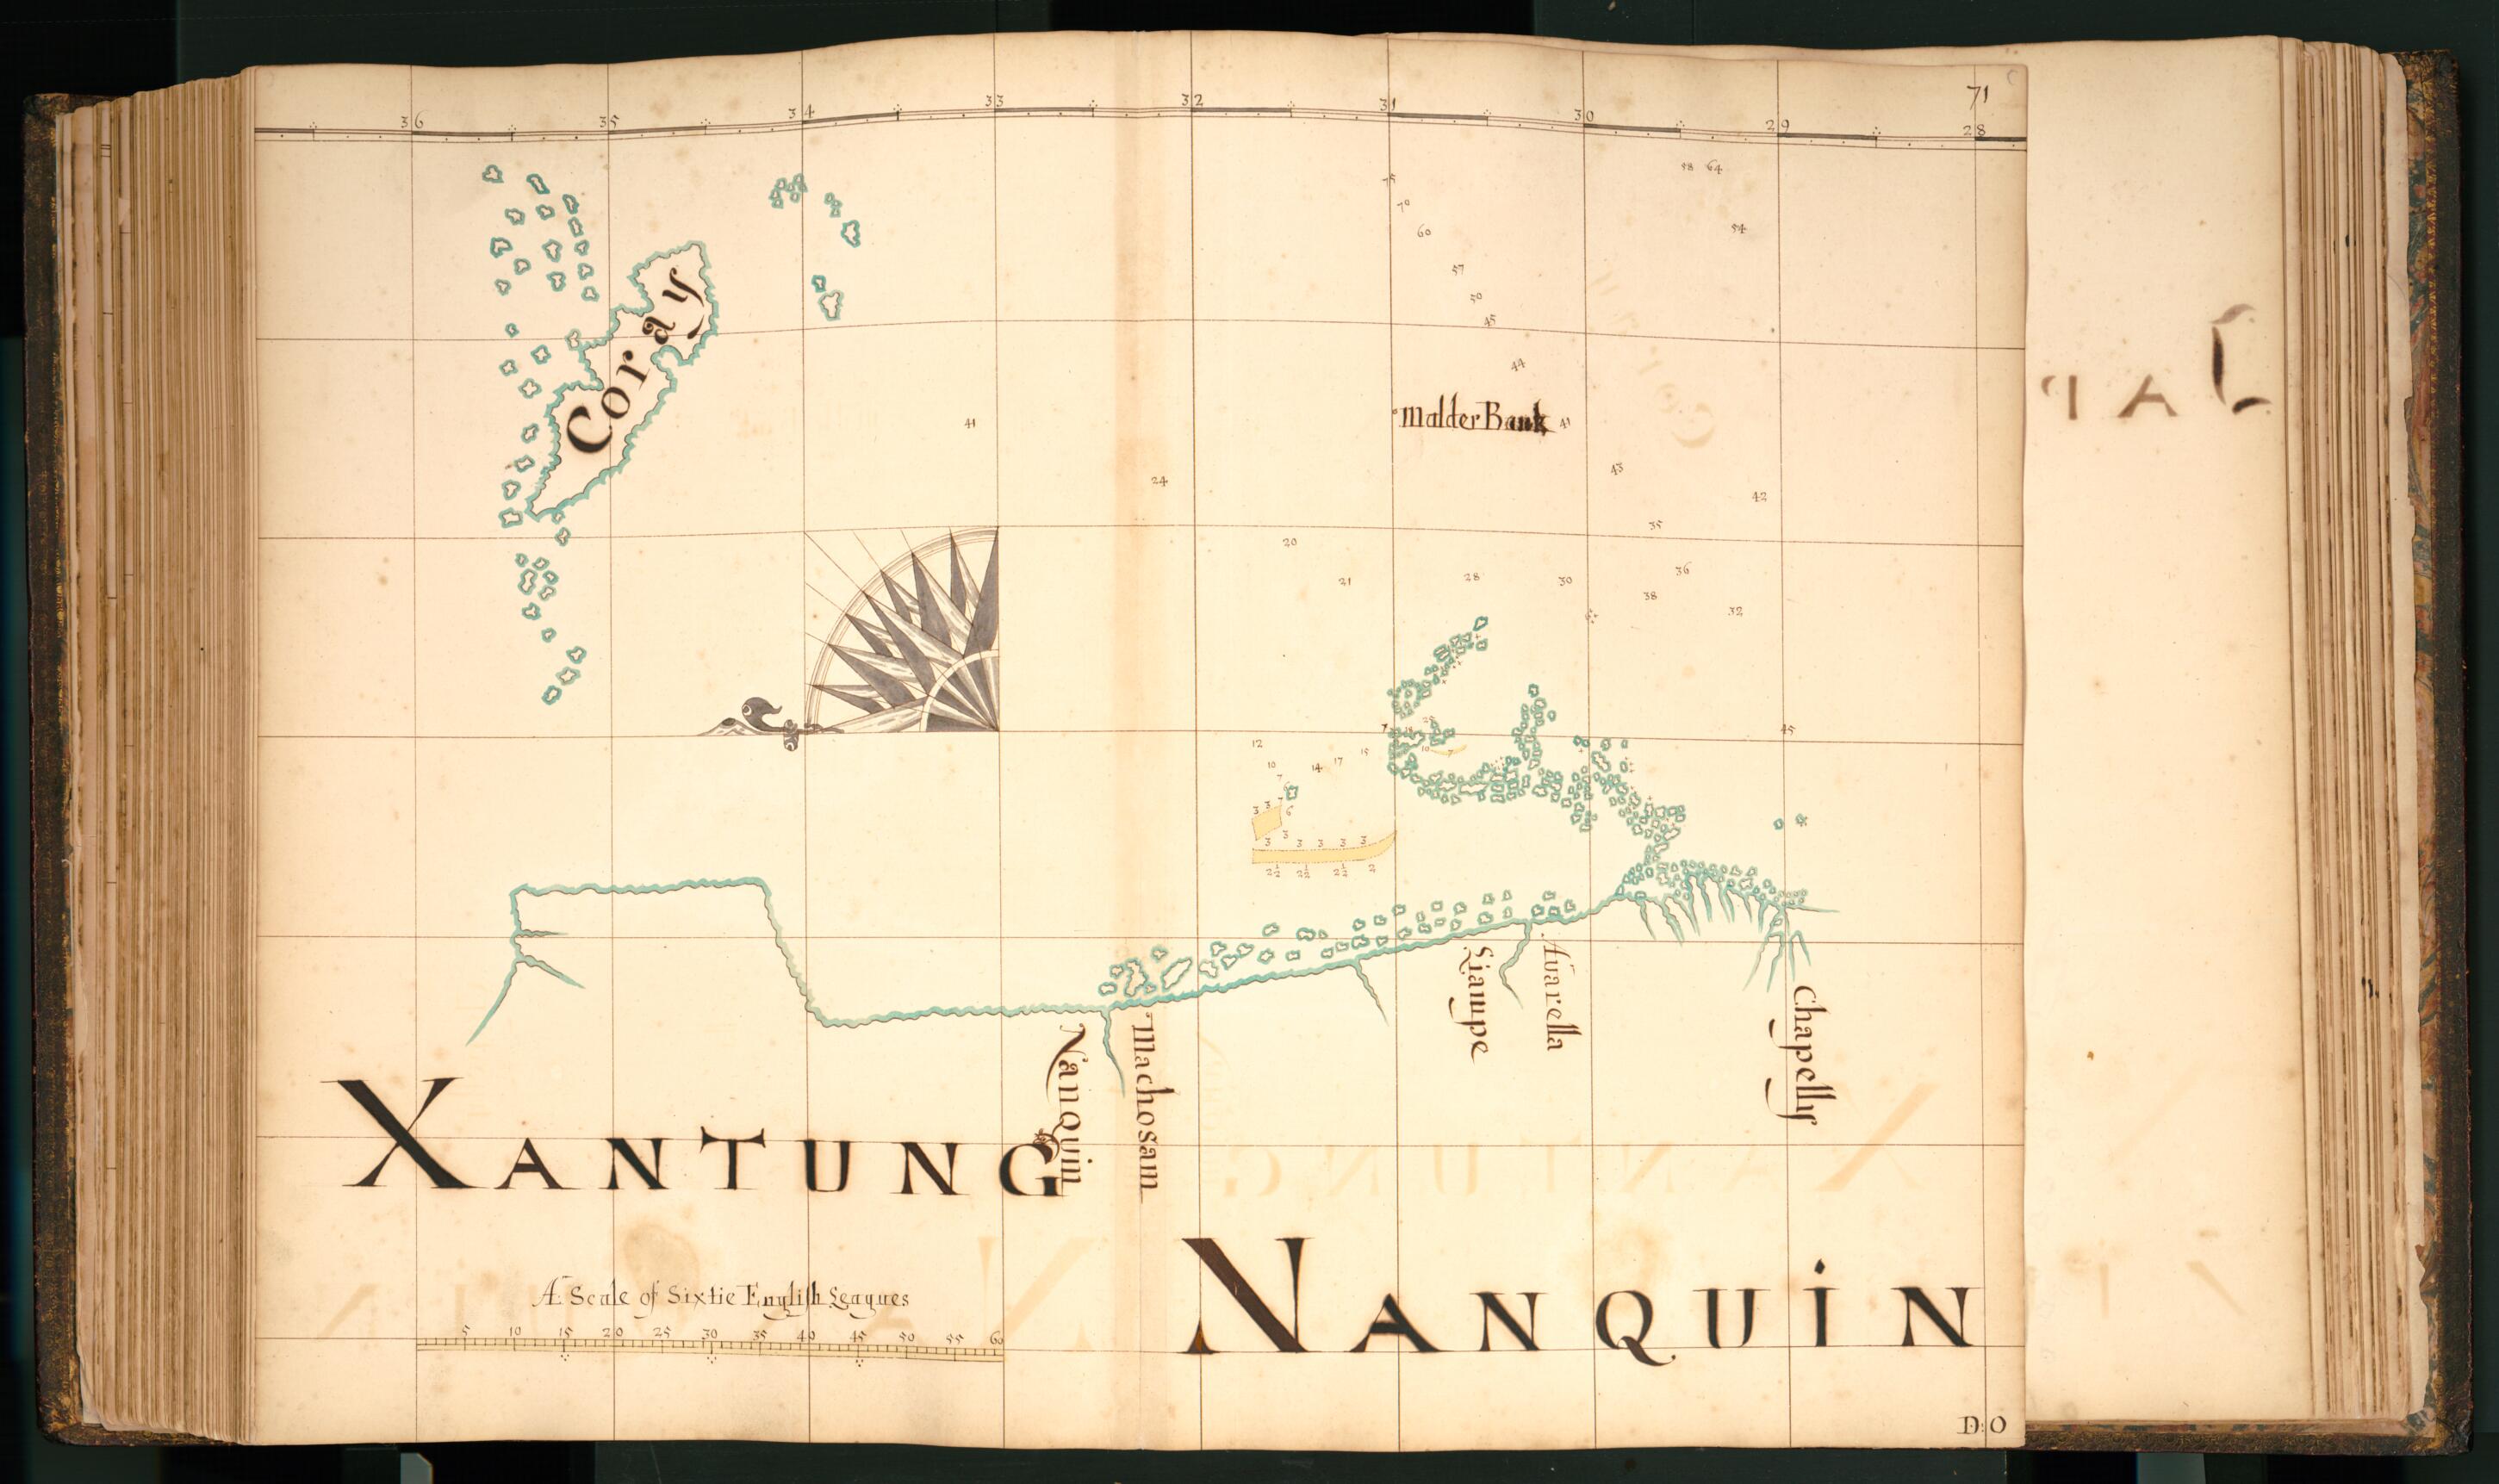 This old map of 71) Xantung, Nanquin from Buccaneer Atlas from 1690 was created by William Hacke in 1690